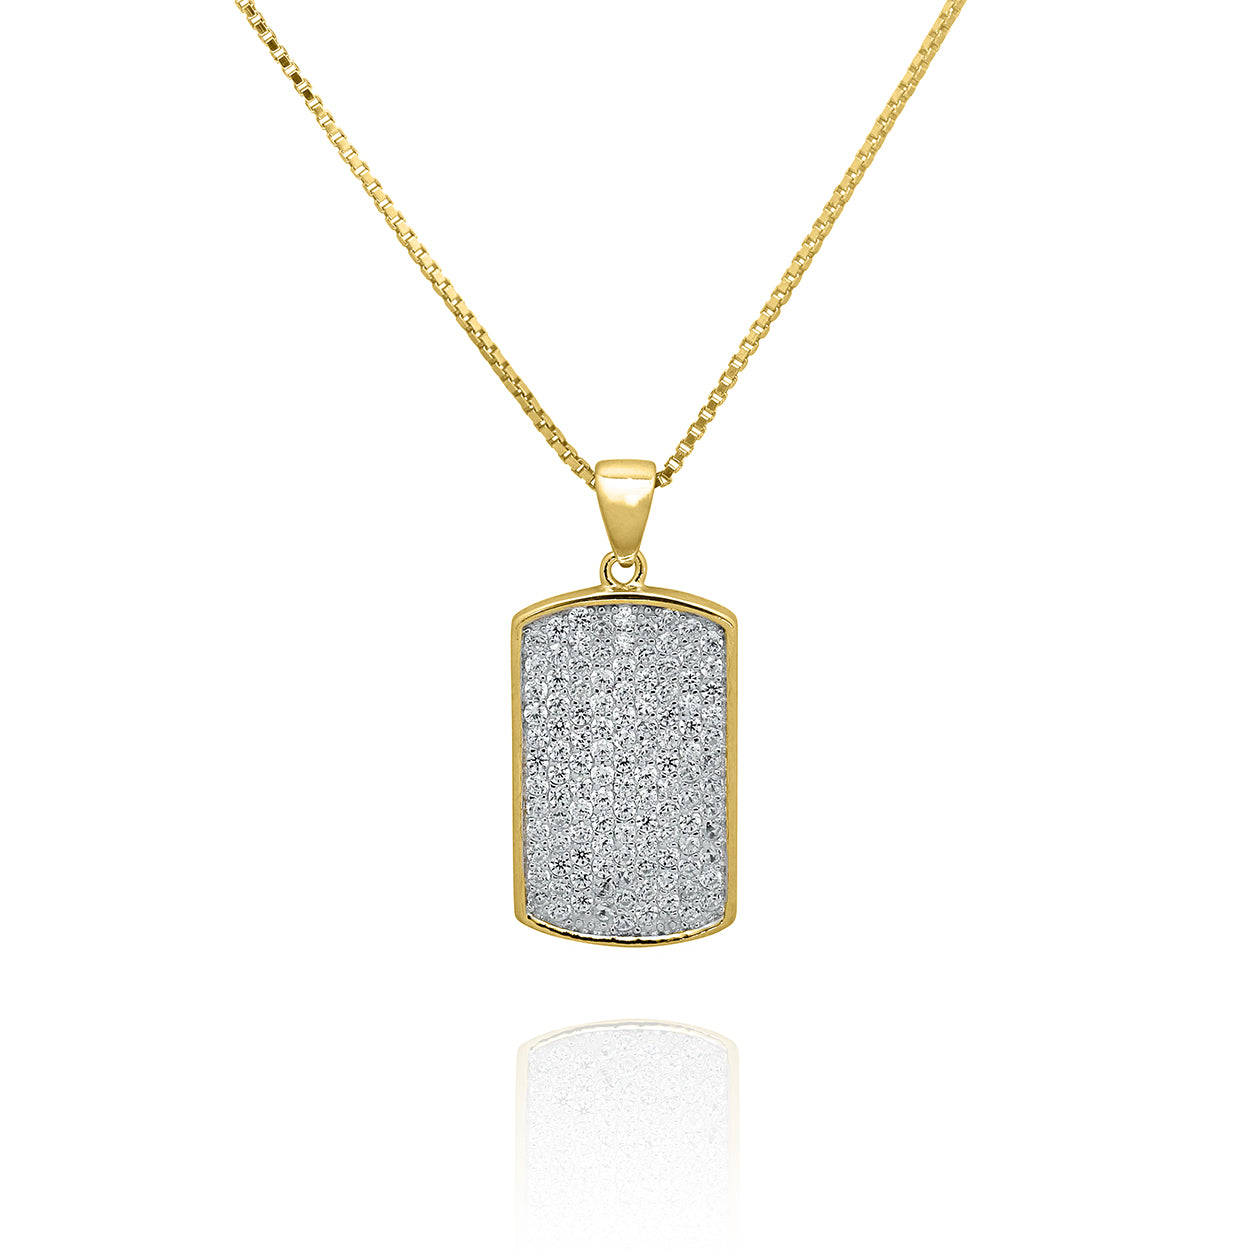 Sterling Silver 18KT Gold Plated Dog Tag Pendant set with Cubic Zirconia on a Box Chain